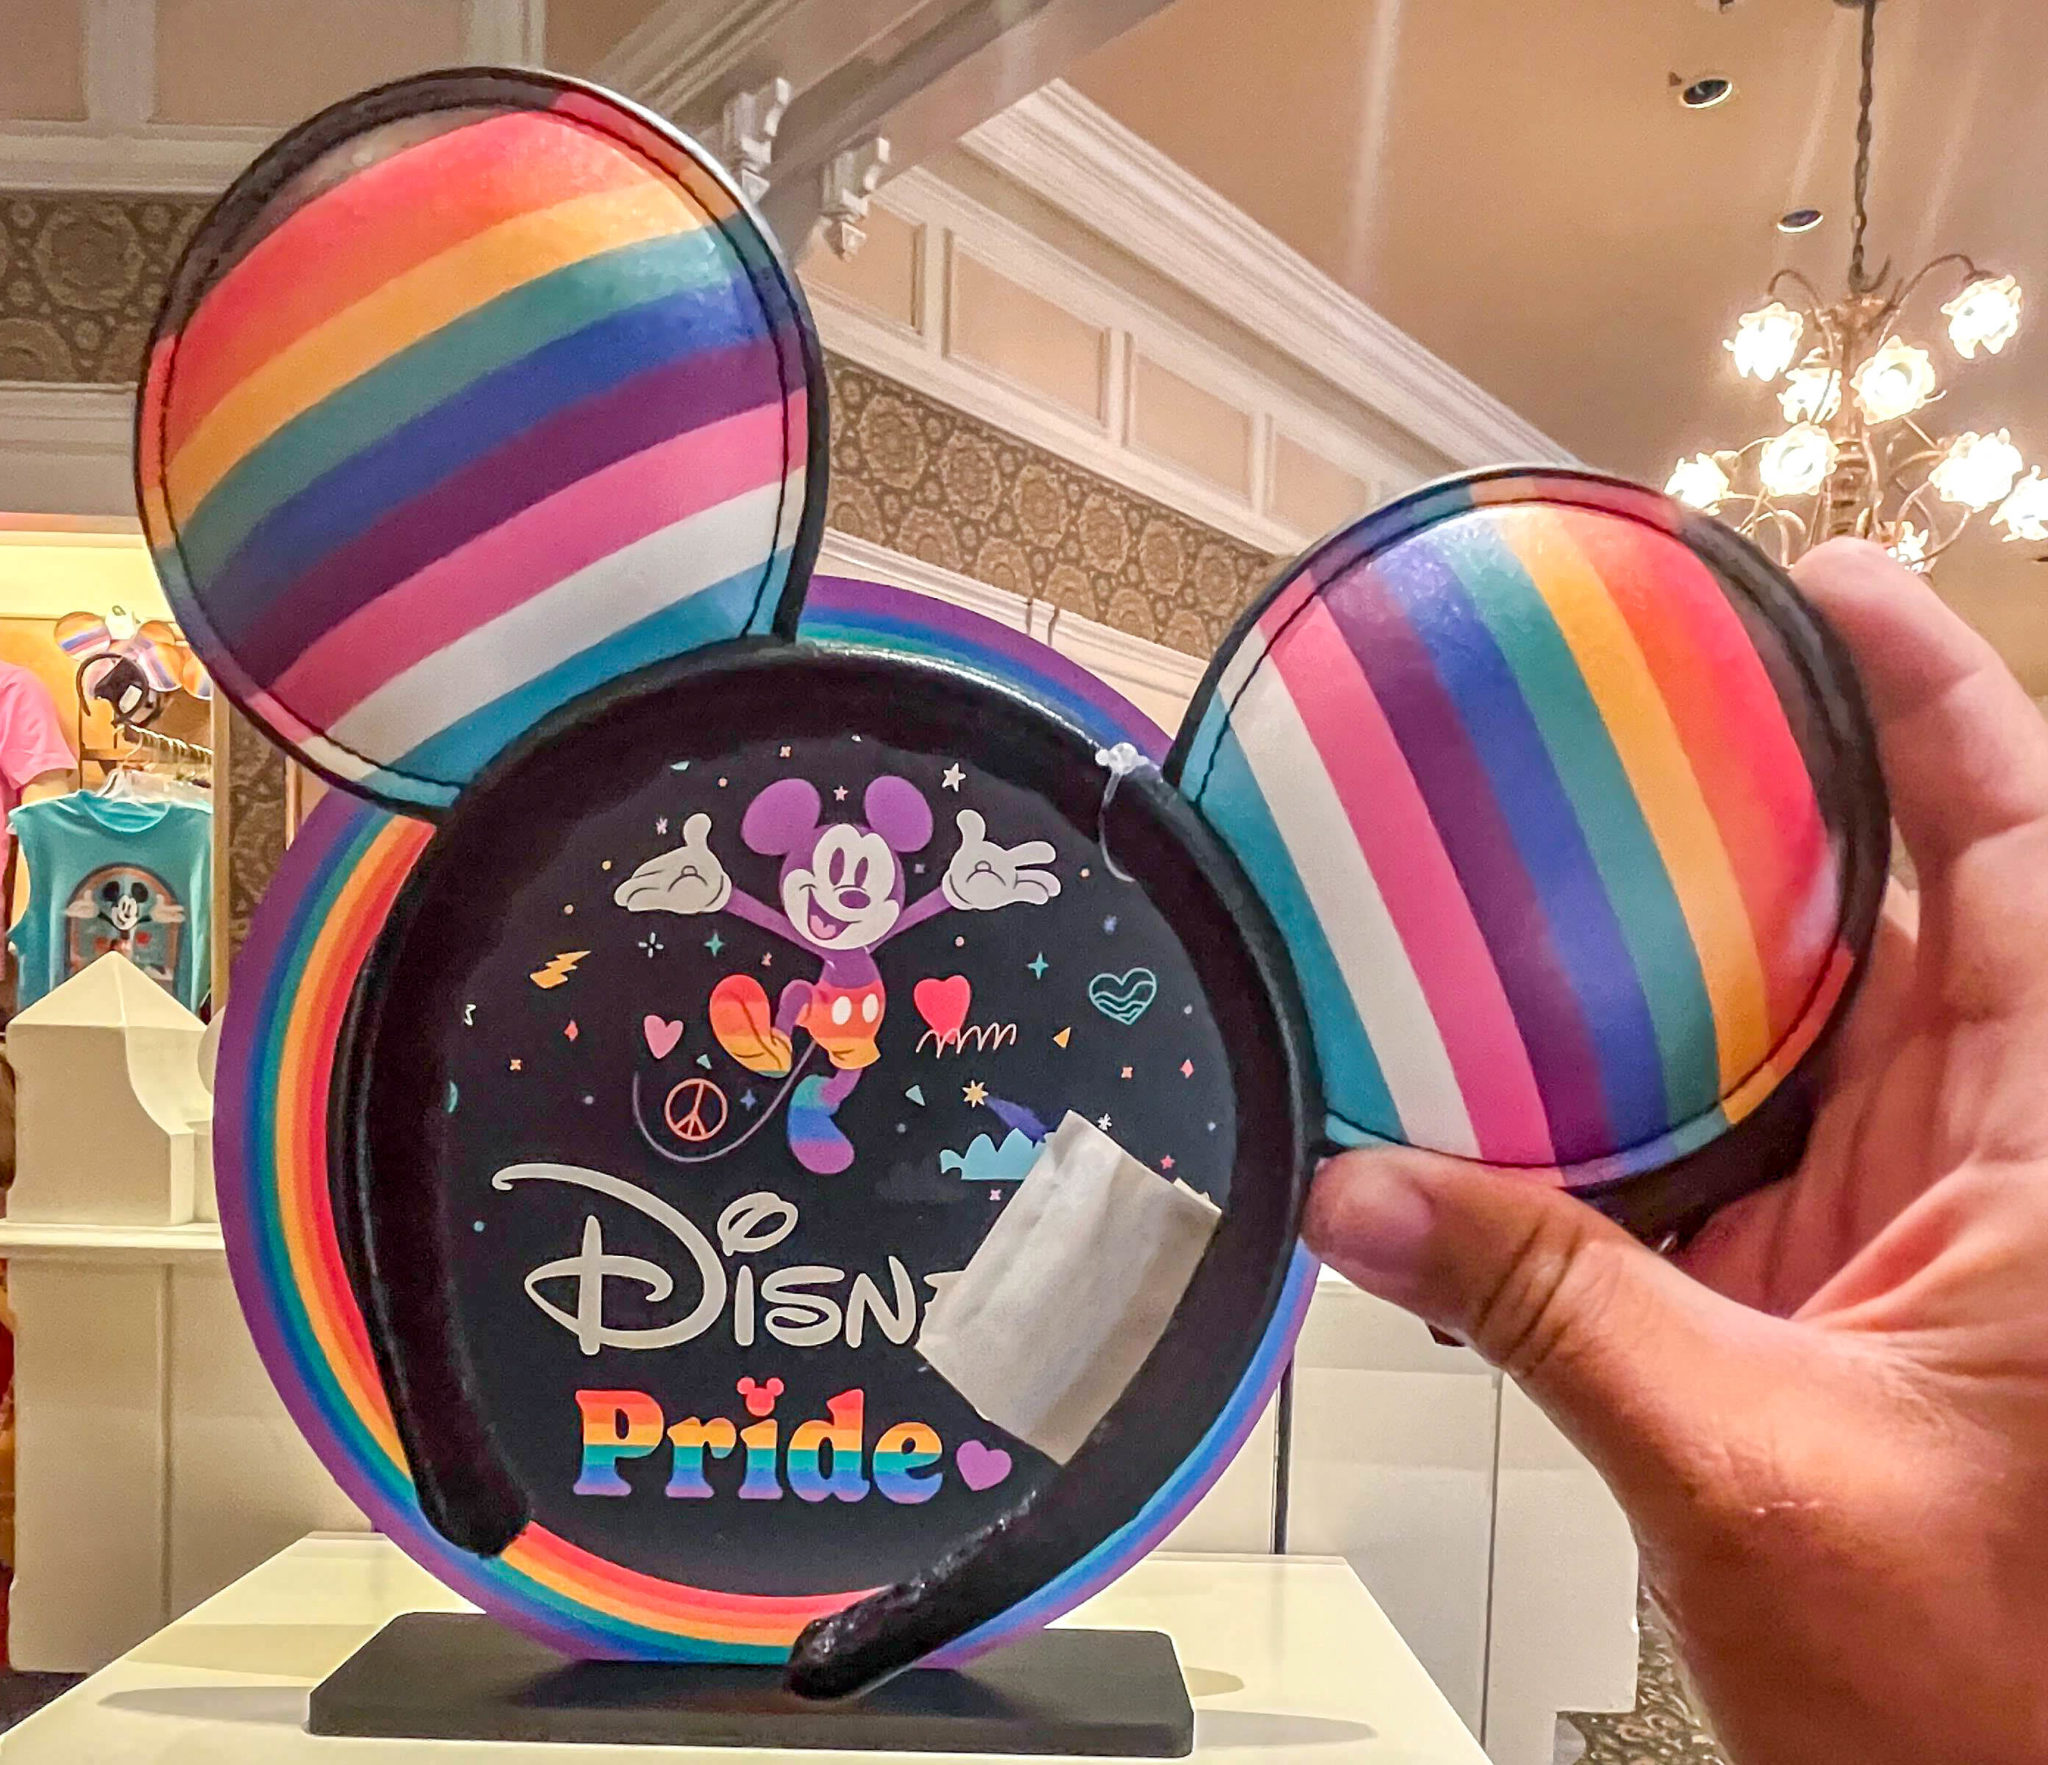 PHOTOS 2023 Disney Pride Collection Arrives in Disney World and Online